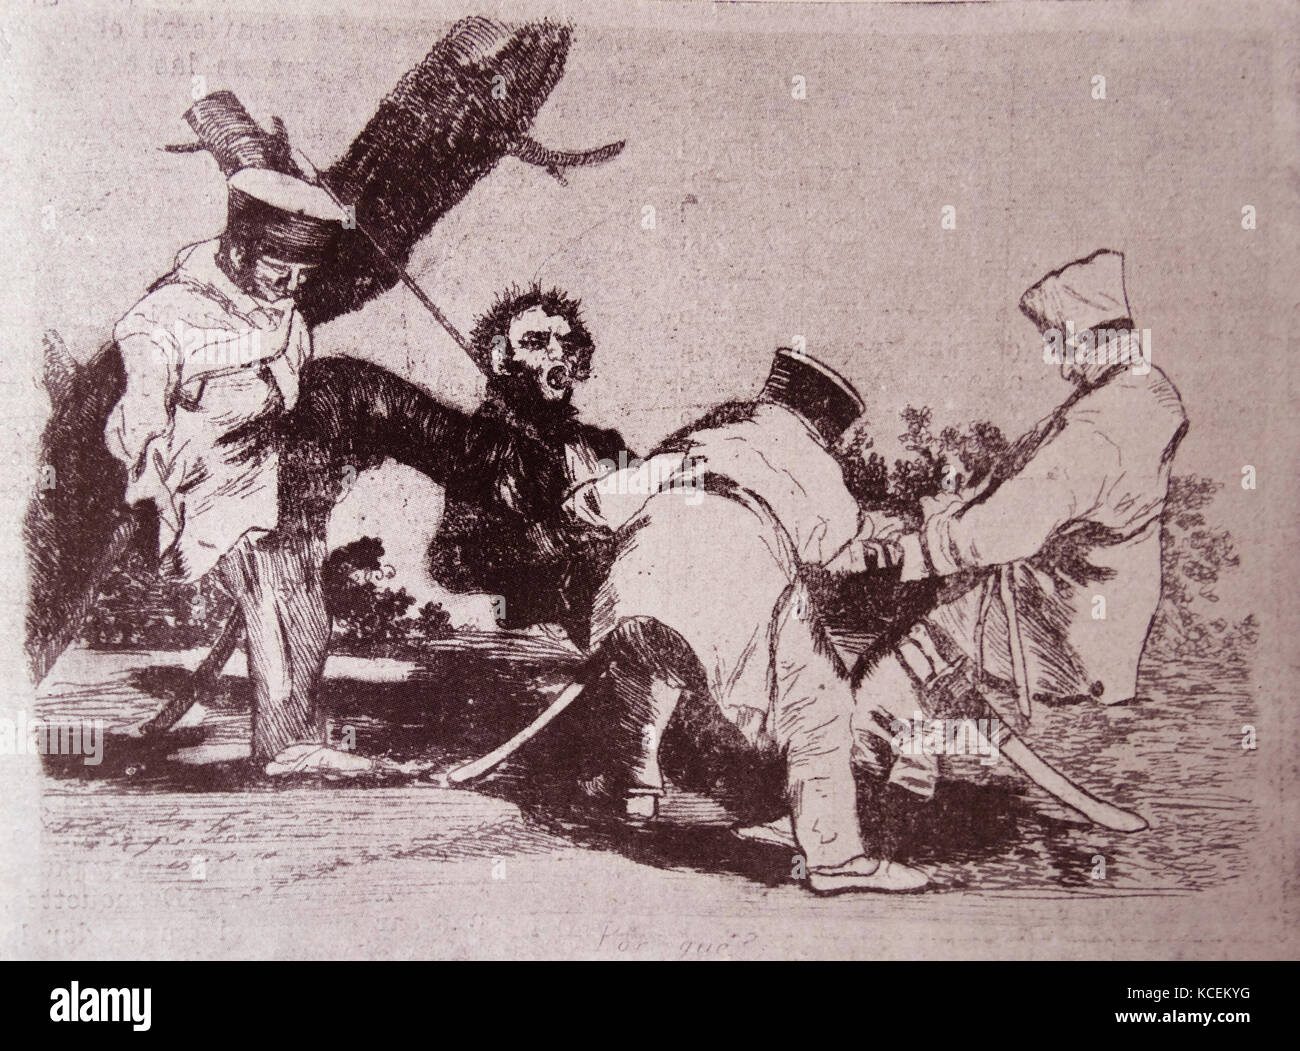 Illustration by Francisco Goya (1746-1828) a Spanish Romantic painter, outlining the French atrocities during the Napoleonic invasion of Spain. Dated 19th Century Stock Photo